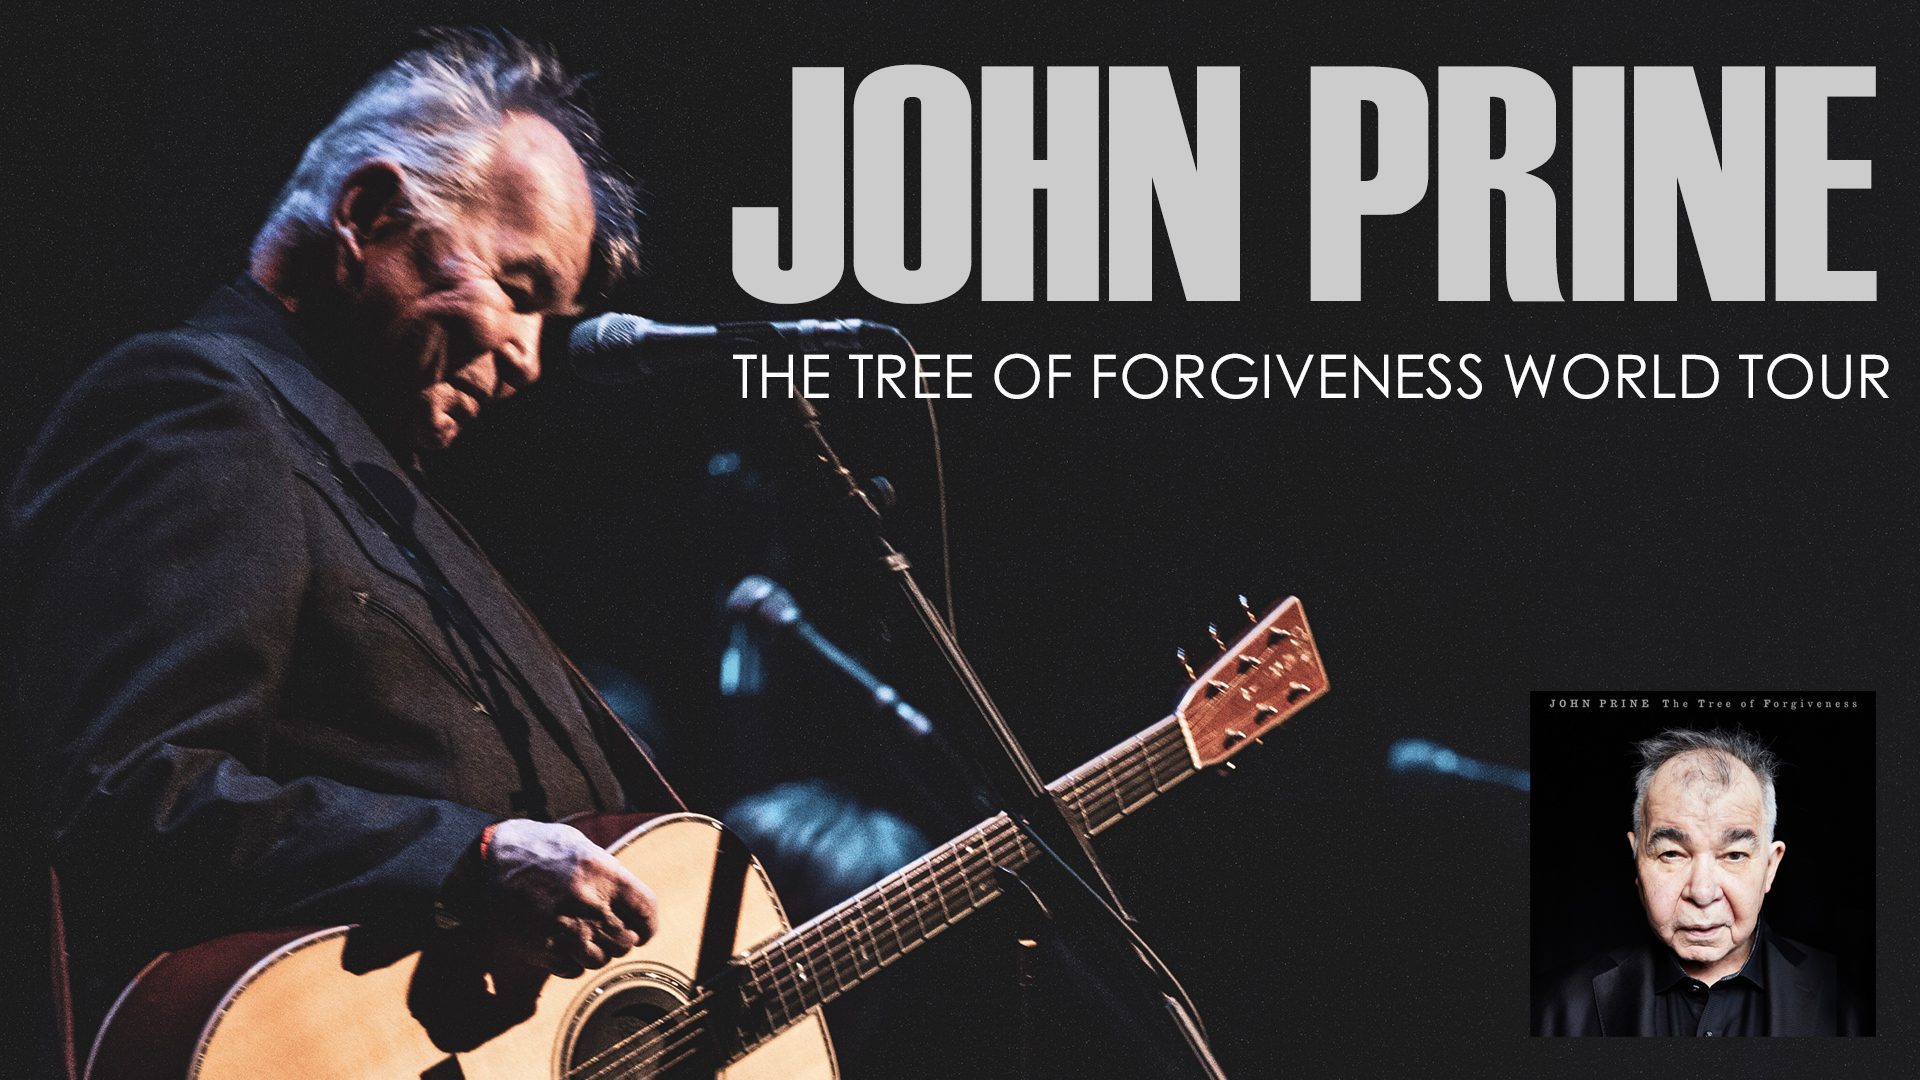 JOHN PRINE: The Tree of Forgiveness World Tour with Special Guest Ben Dickey